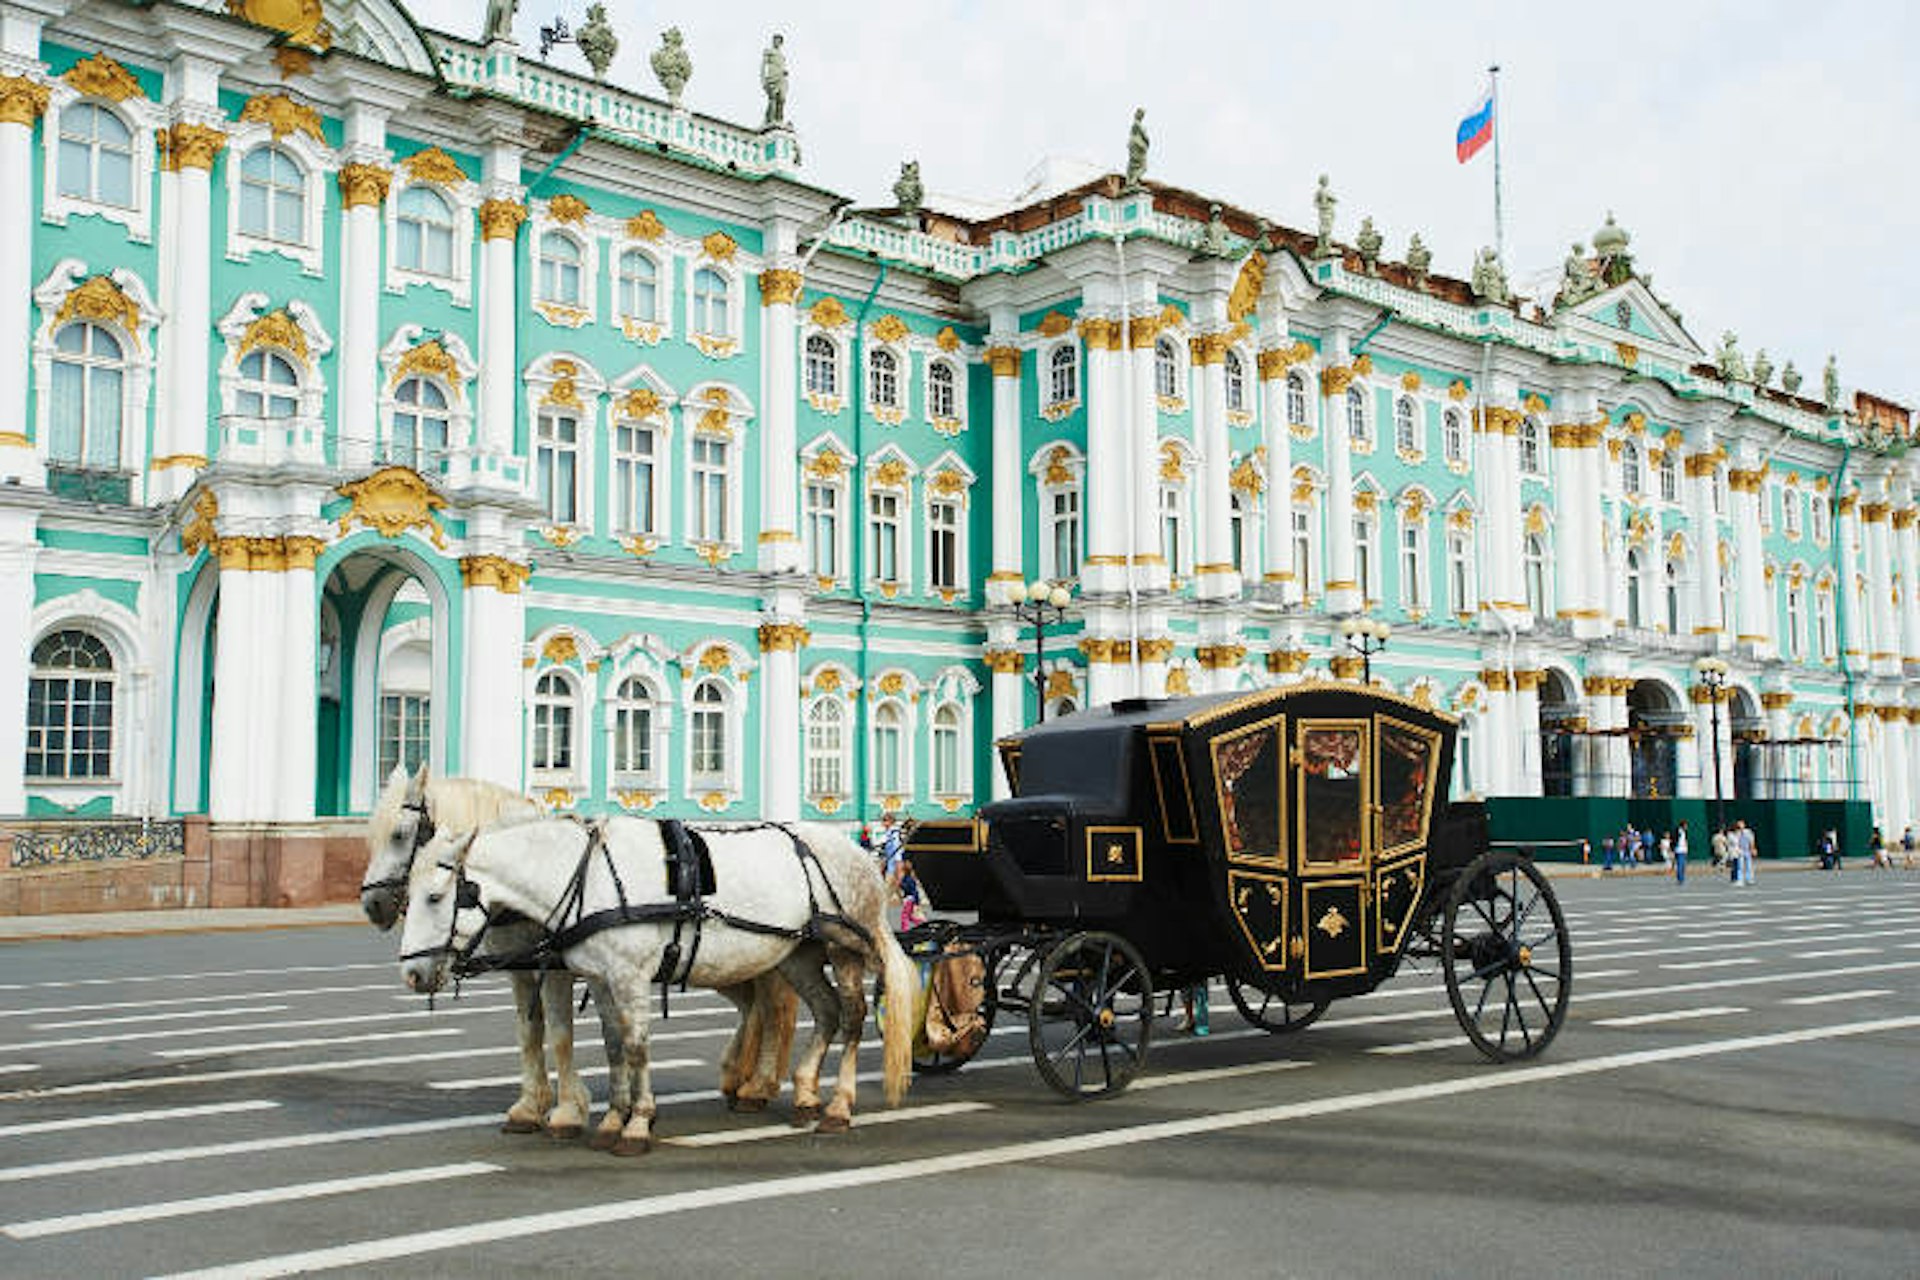 The Winter Palace, State Hermitage Museum. Image by Daniel Alexander / Design Pics / Getty Images